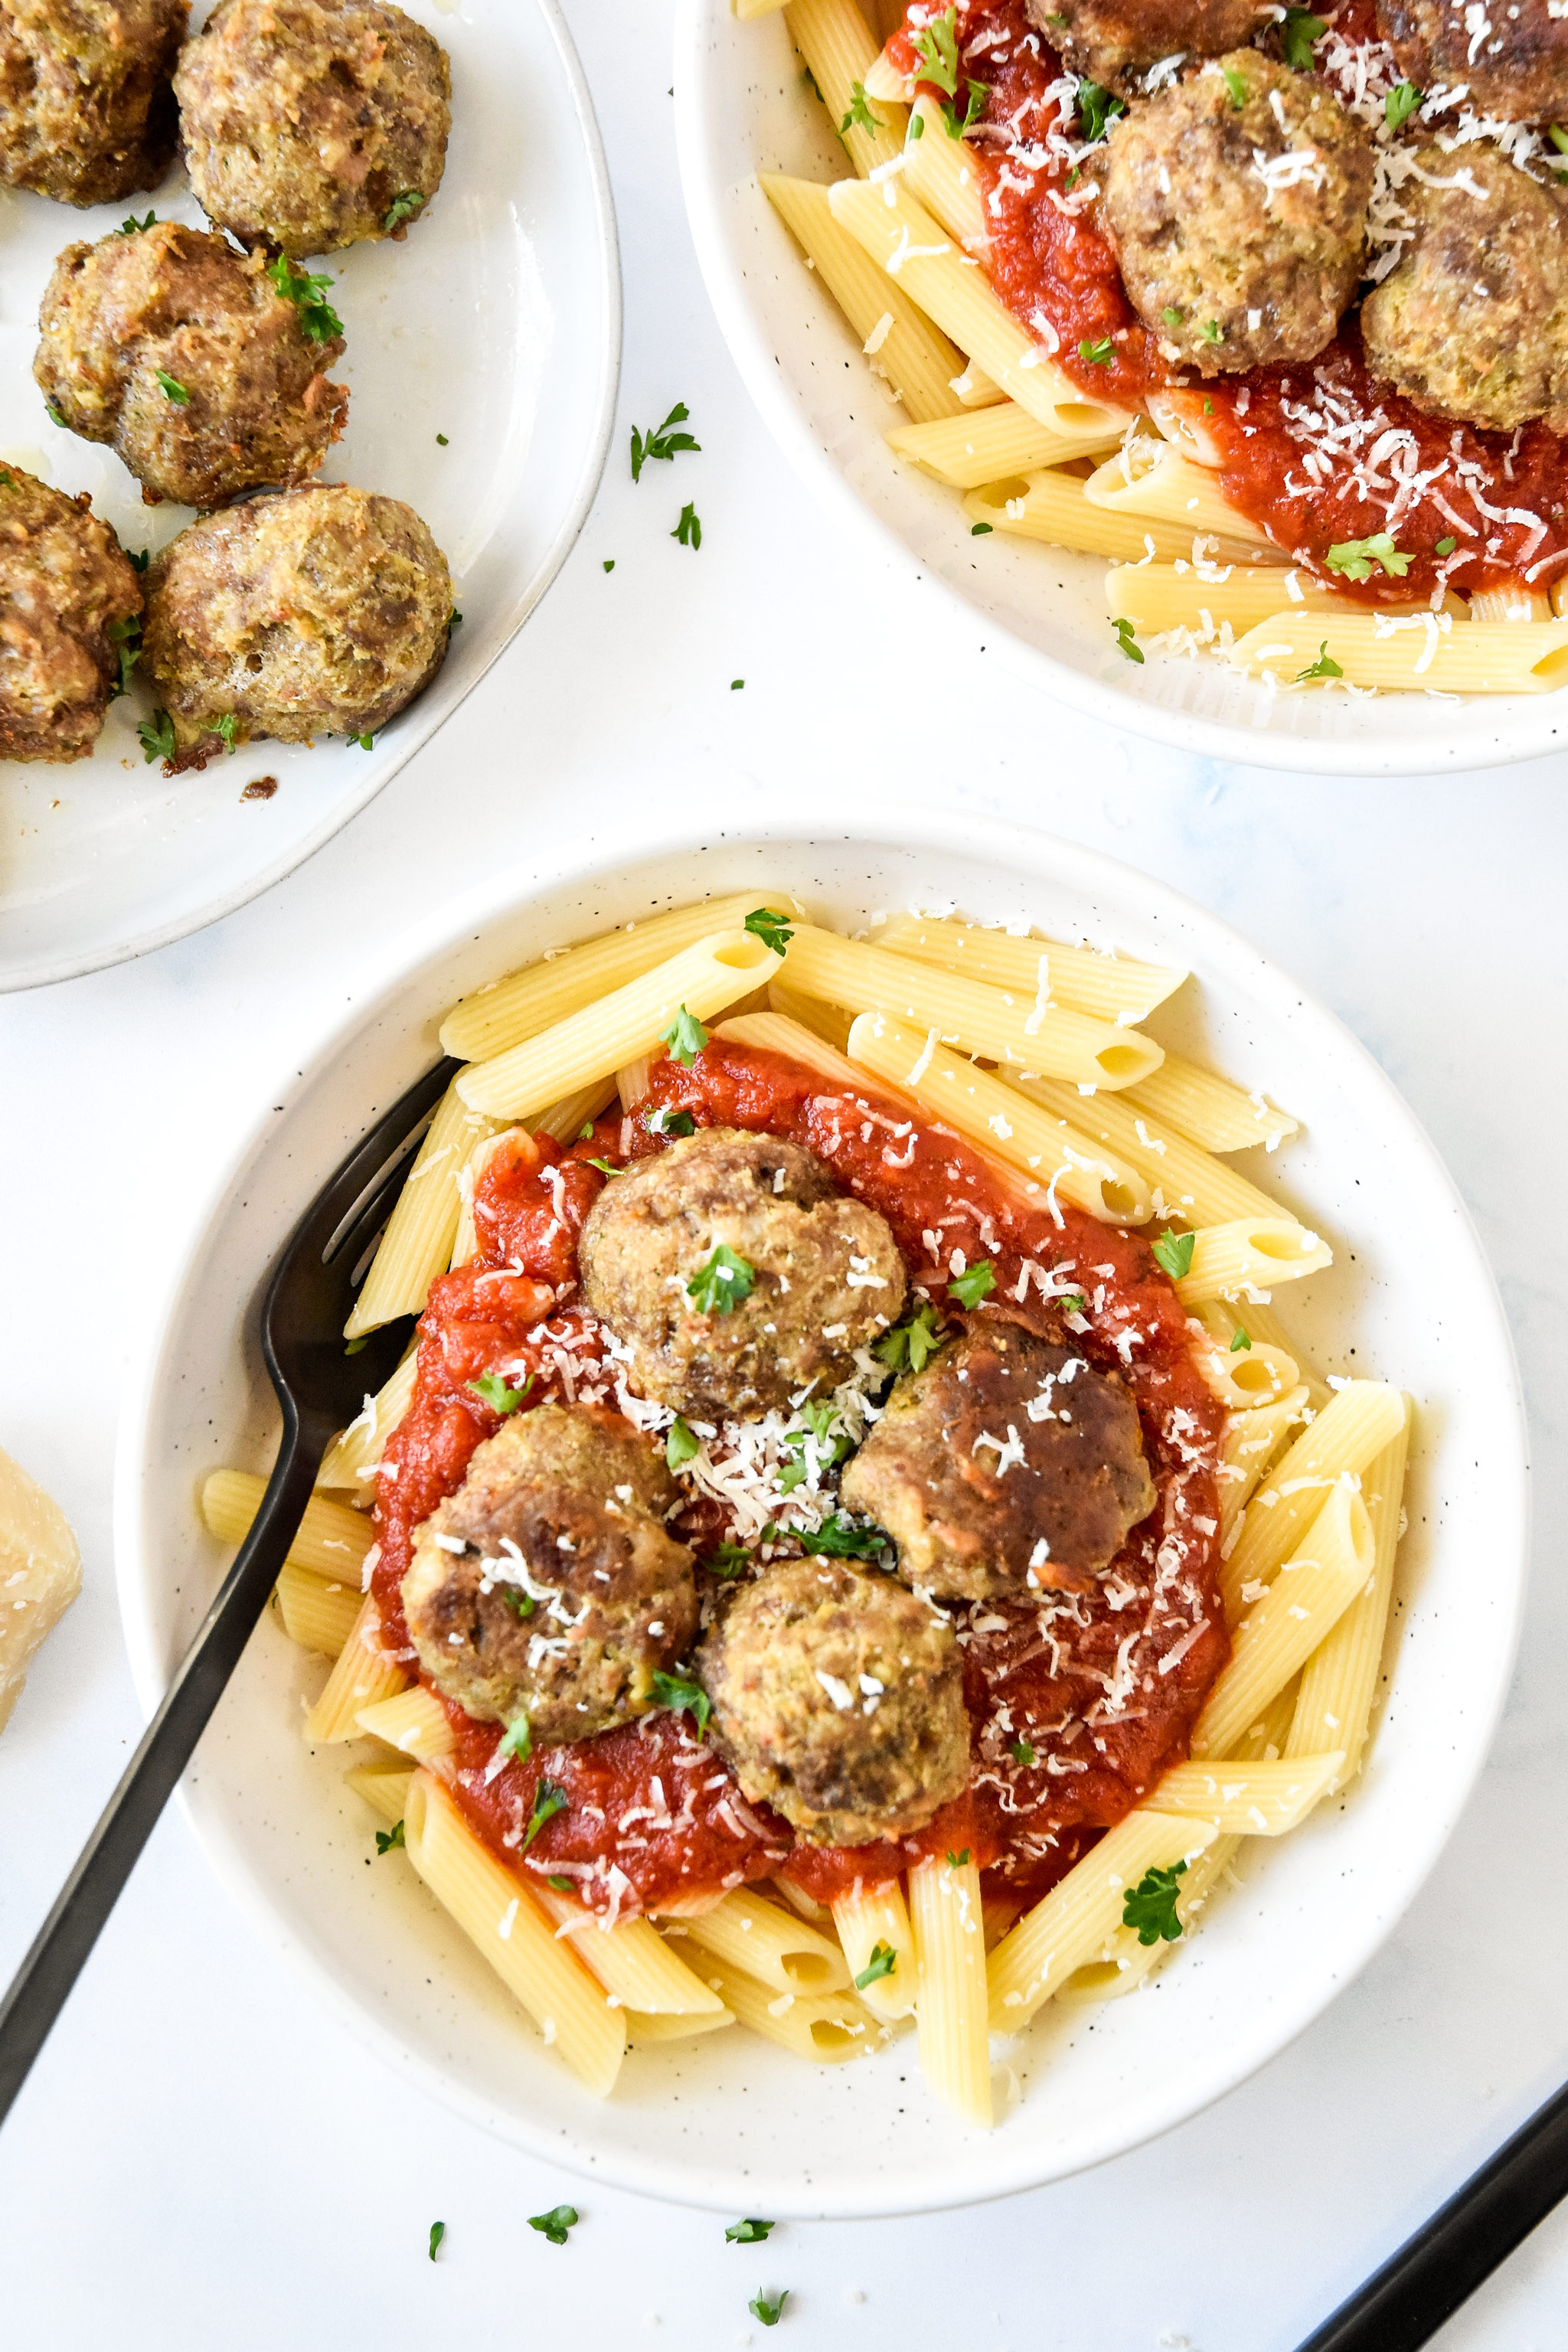 meatballs served with pasta and red sauce plus parmesan and parsley.